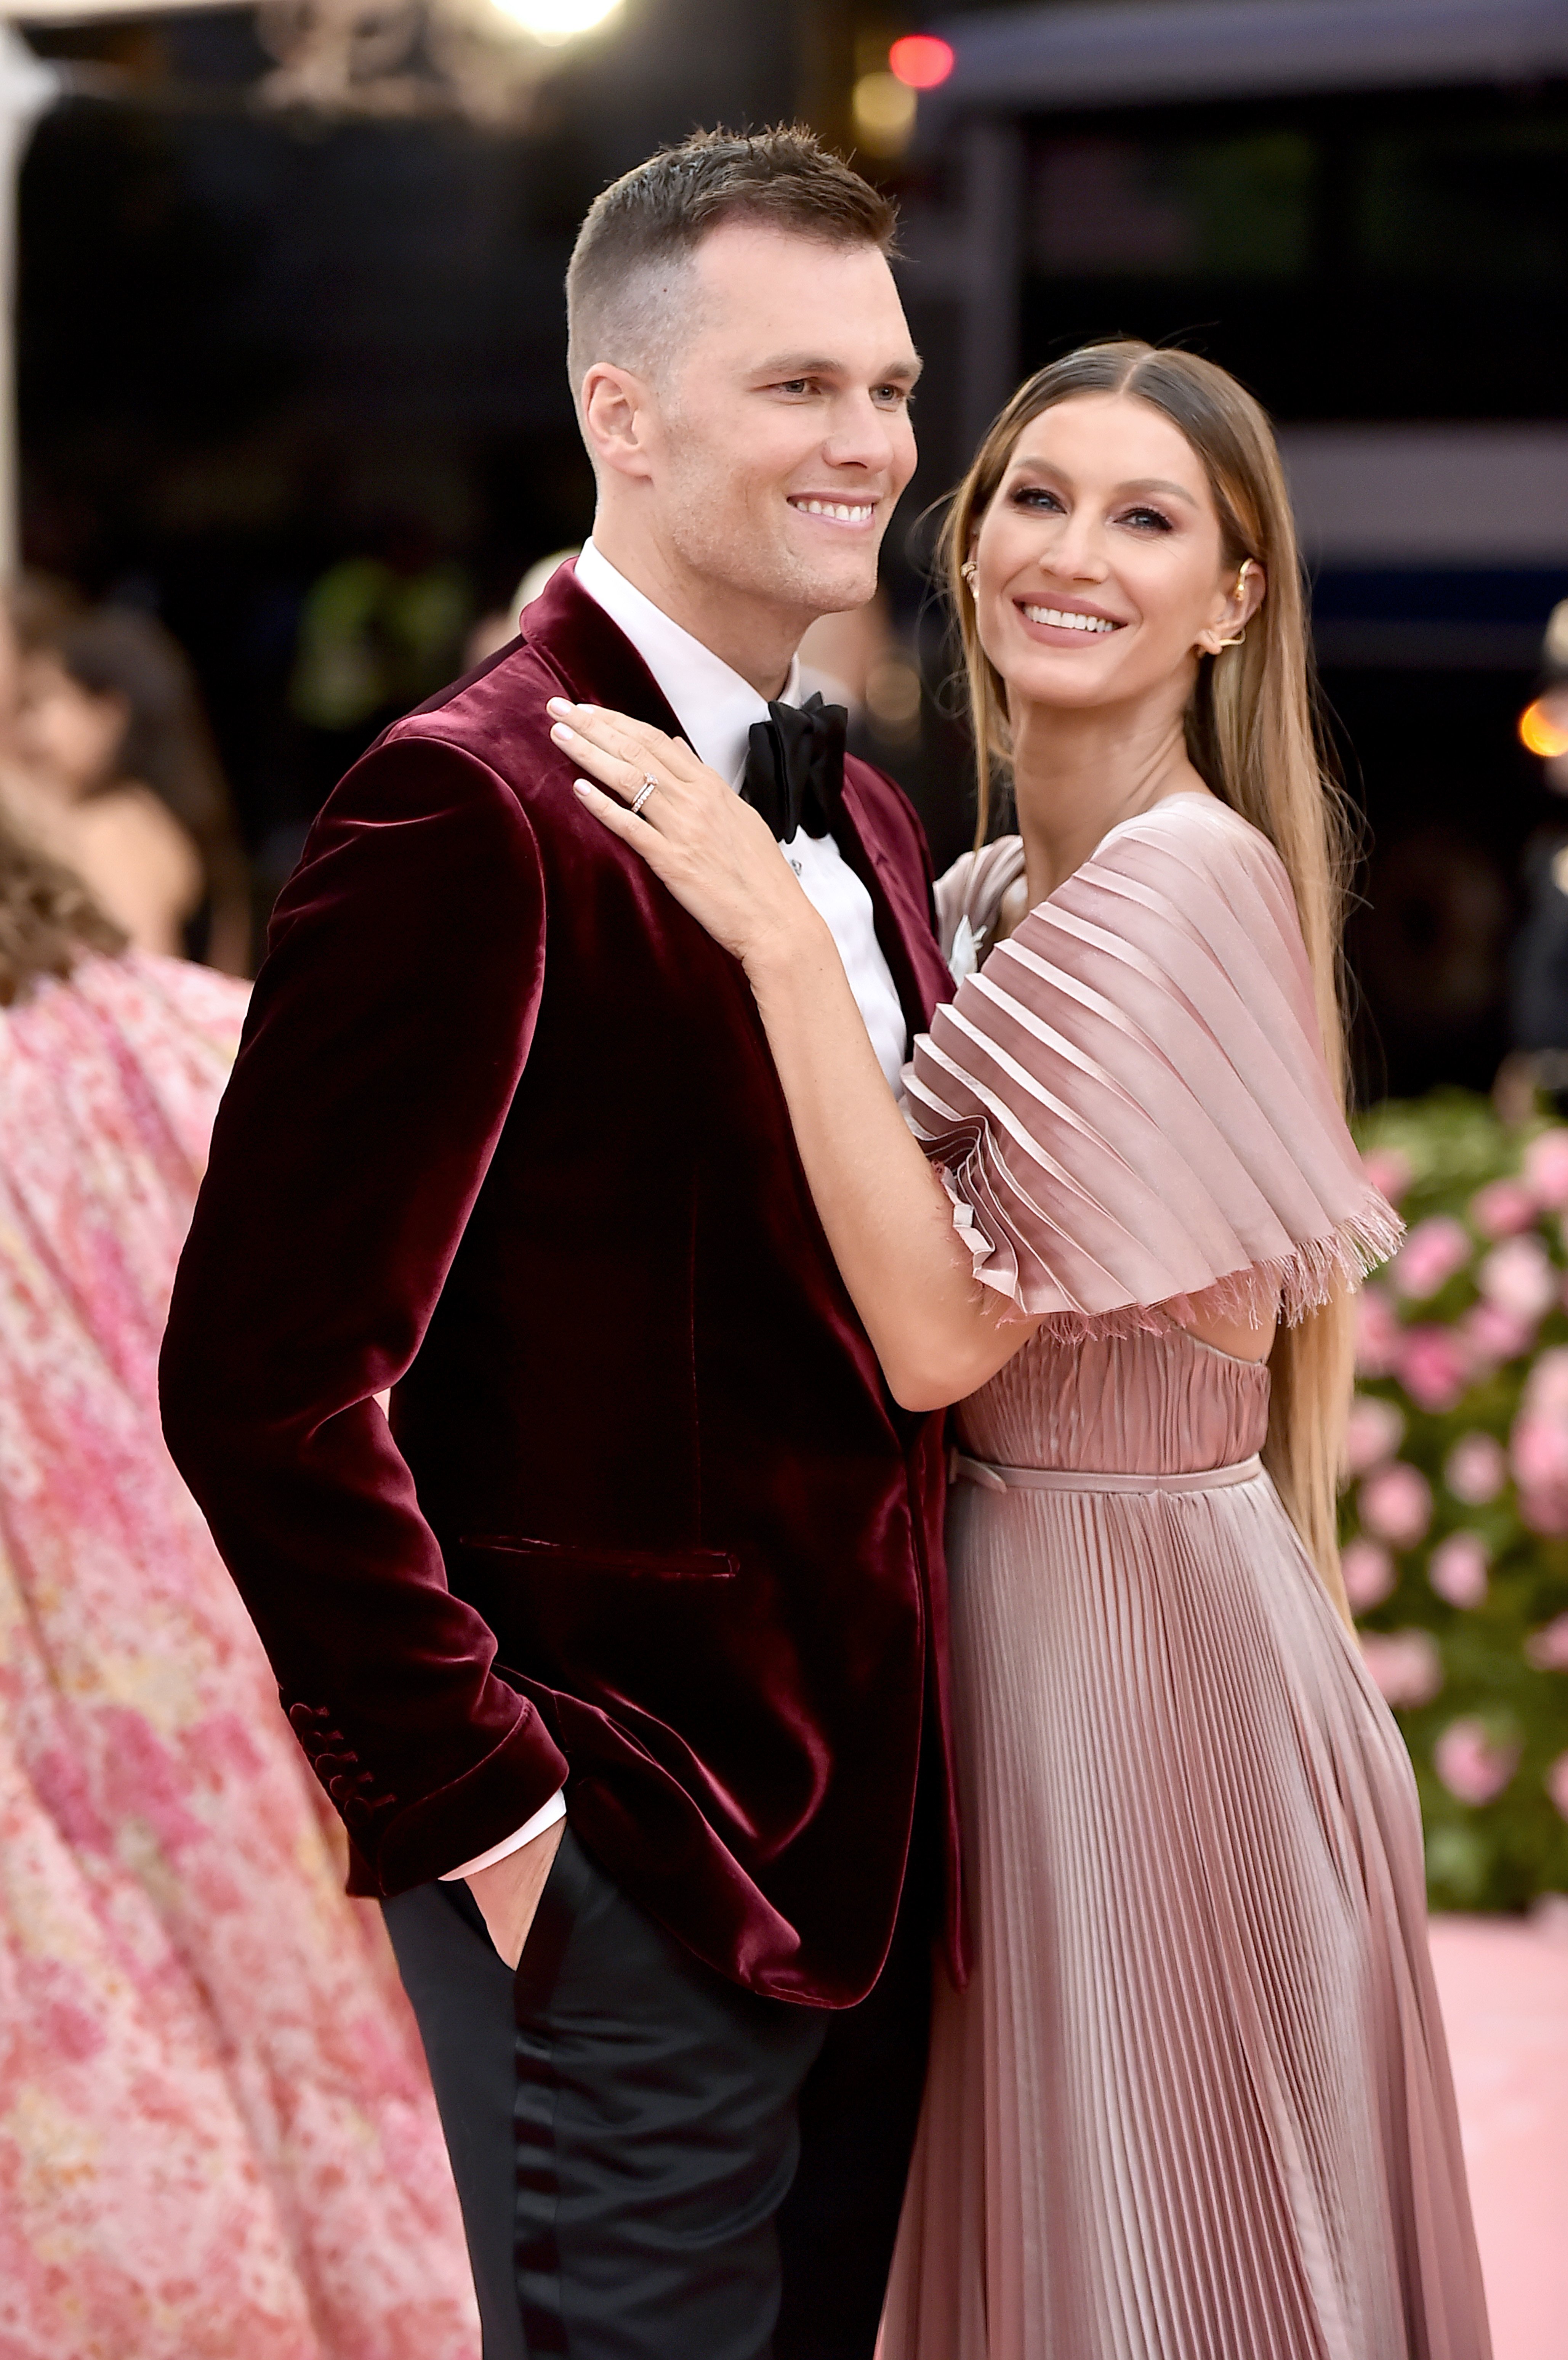 Tom Brady and Gisele Bündchen attend The 2019 Met Gala Celebrating Camp: Notes on Fashion at Metropolitan Museum of Art on May 06, 2019 | Photo: Getty Images